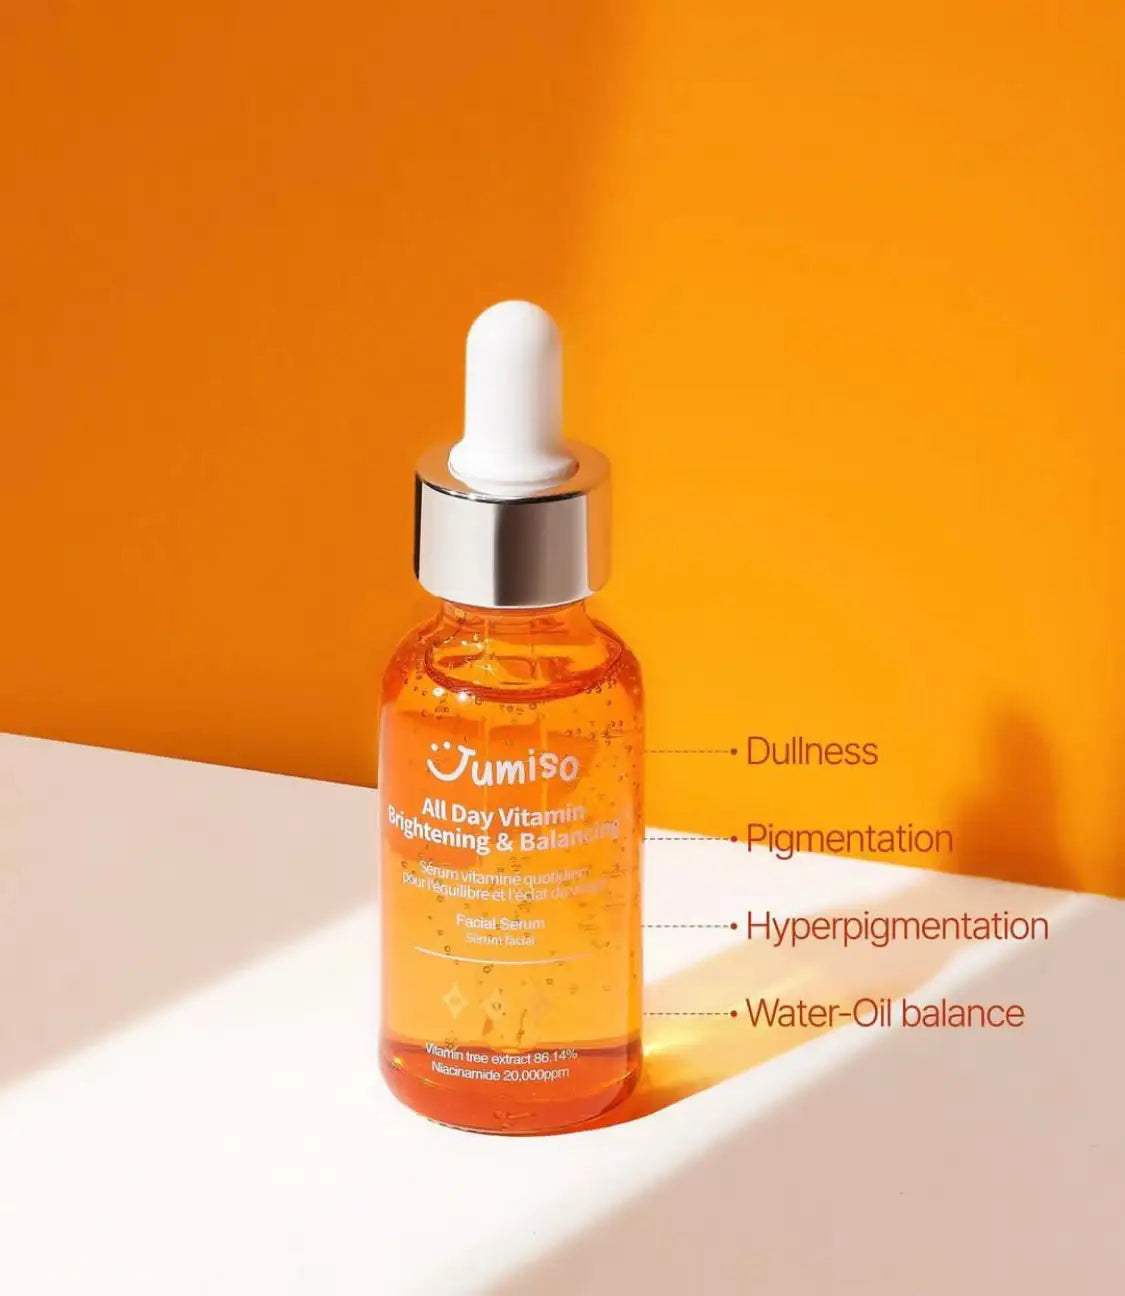 Unveil a brighter, more radiant complexion with the nutrient-rich formula of All Day Vitamin Brightening & Balancing Facial Serum, designed to combat dullness and uneven skin tone